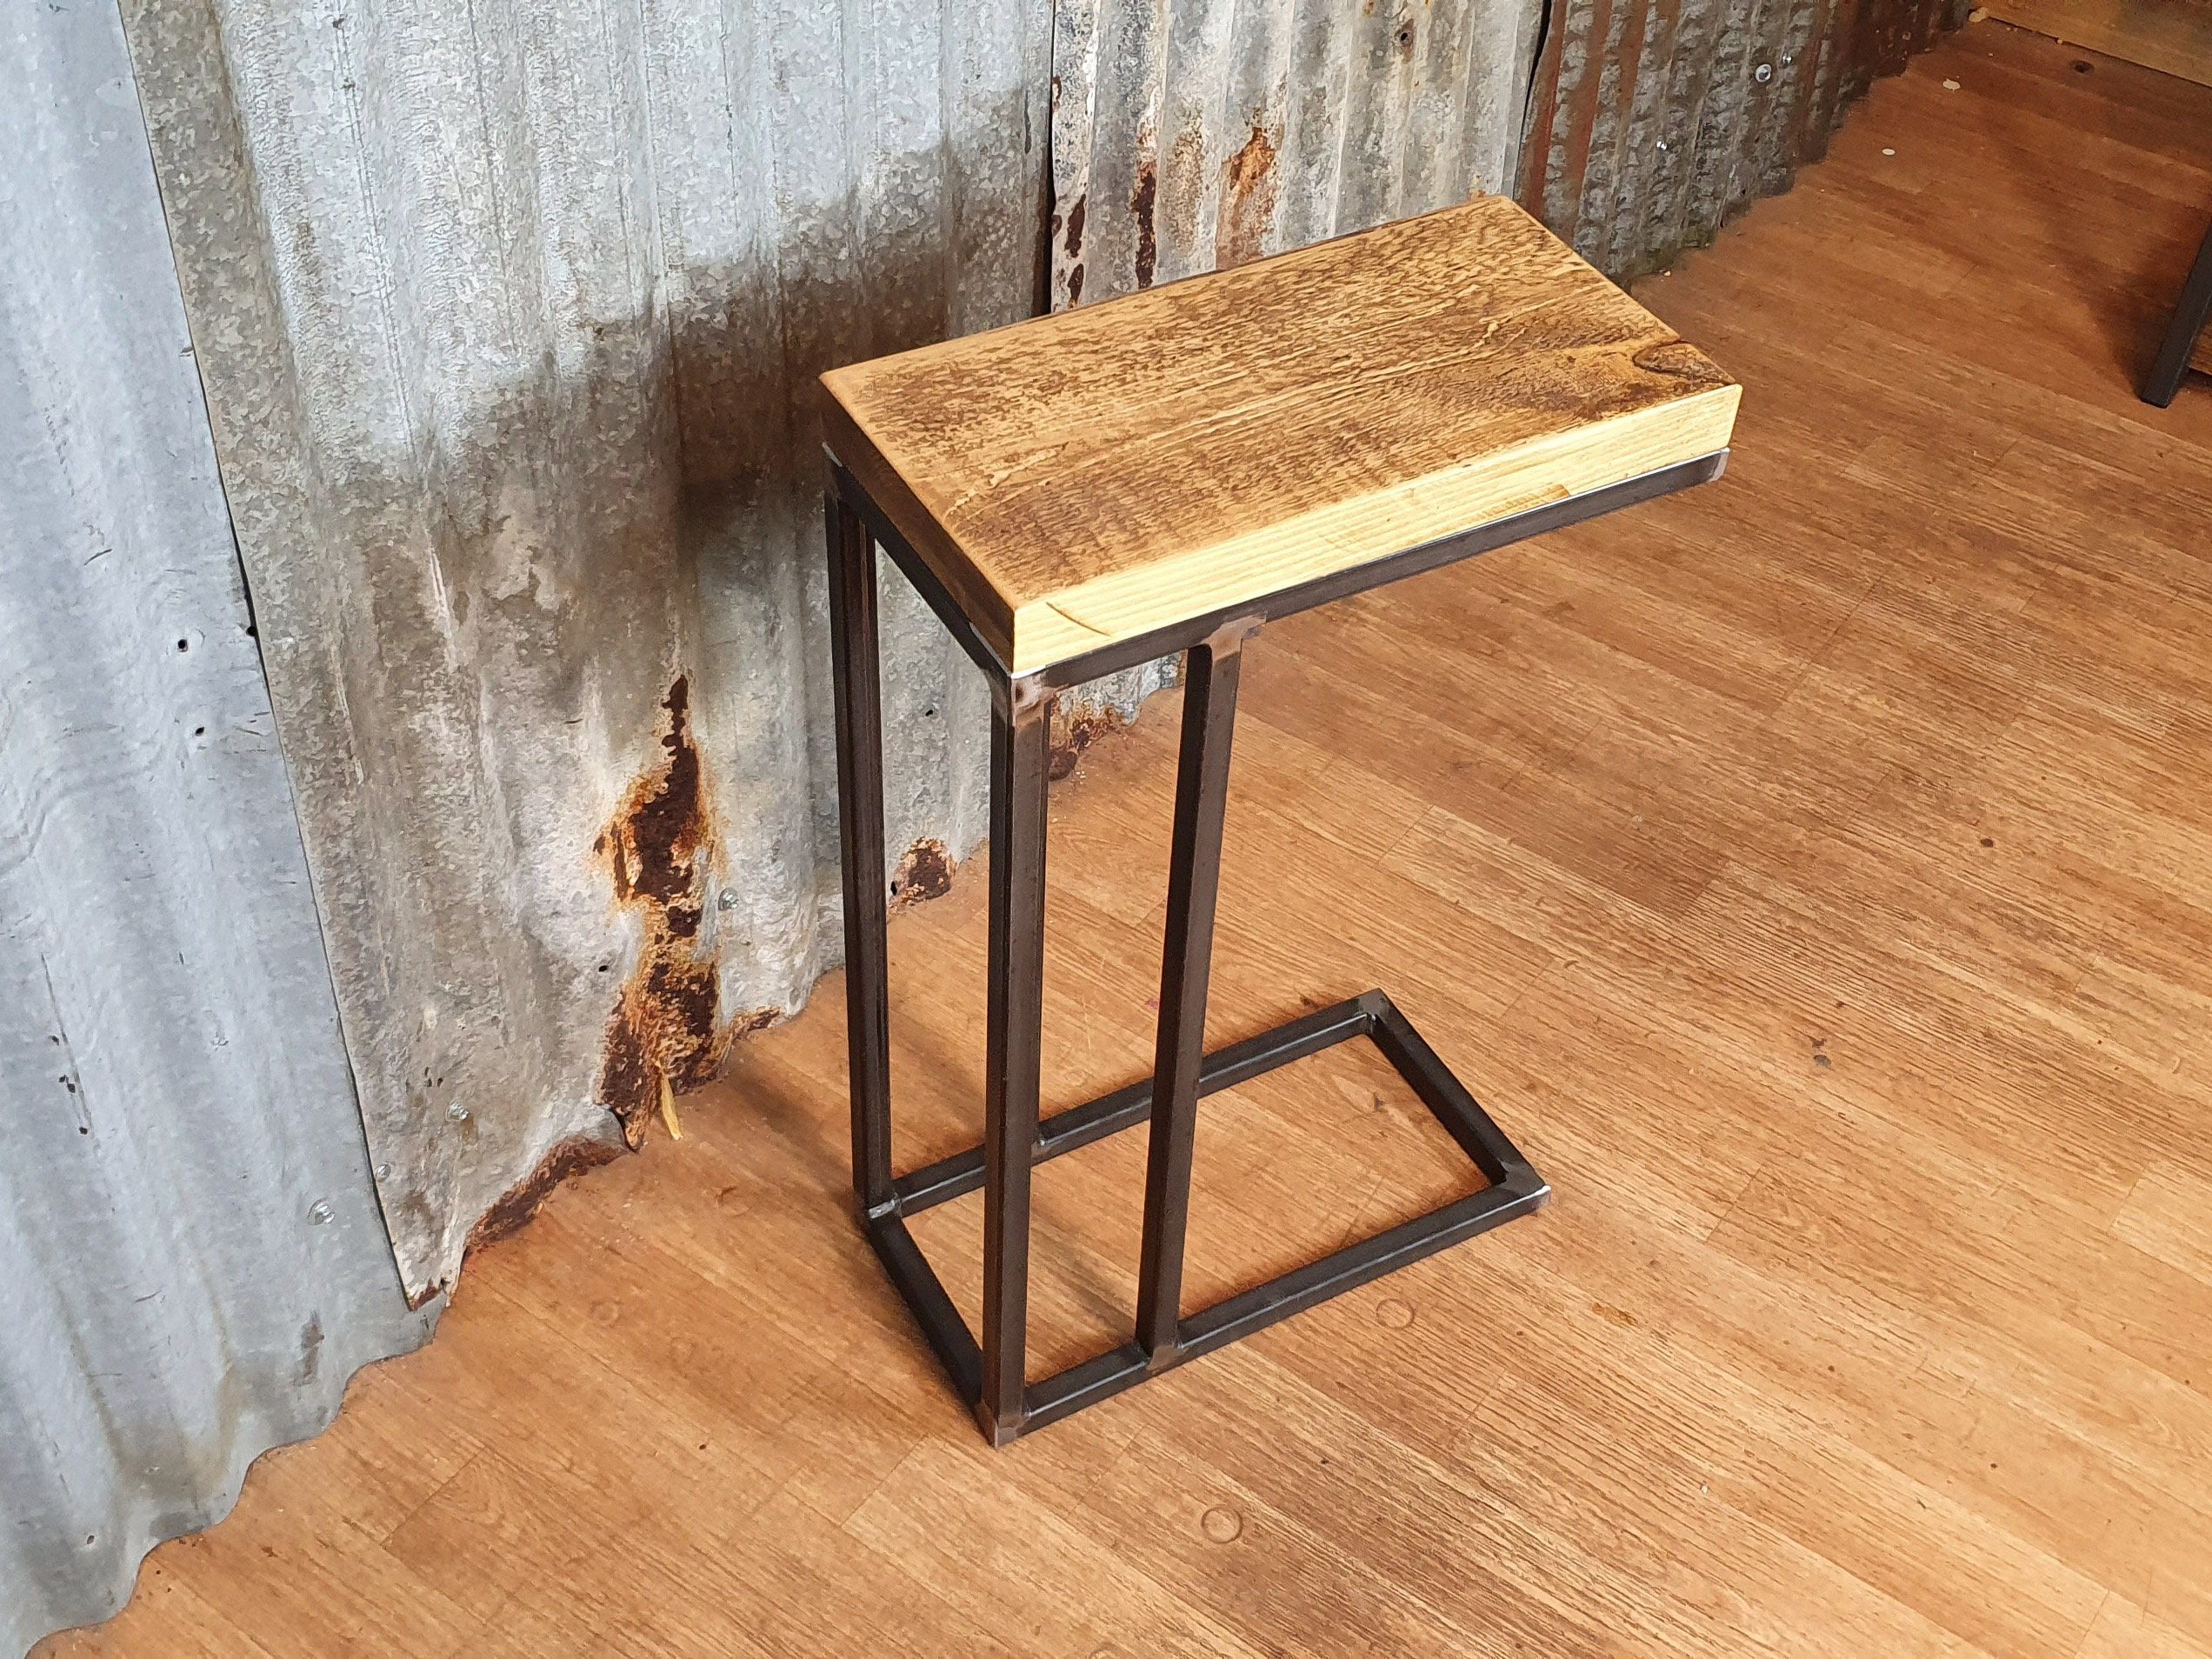 Rustic Industrial Sofa Side Table, Wooden C Shaped Lap Inside Rustic Barnside Console Tables (View 5 of 20)